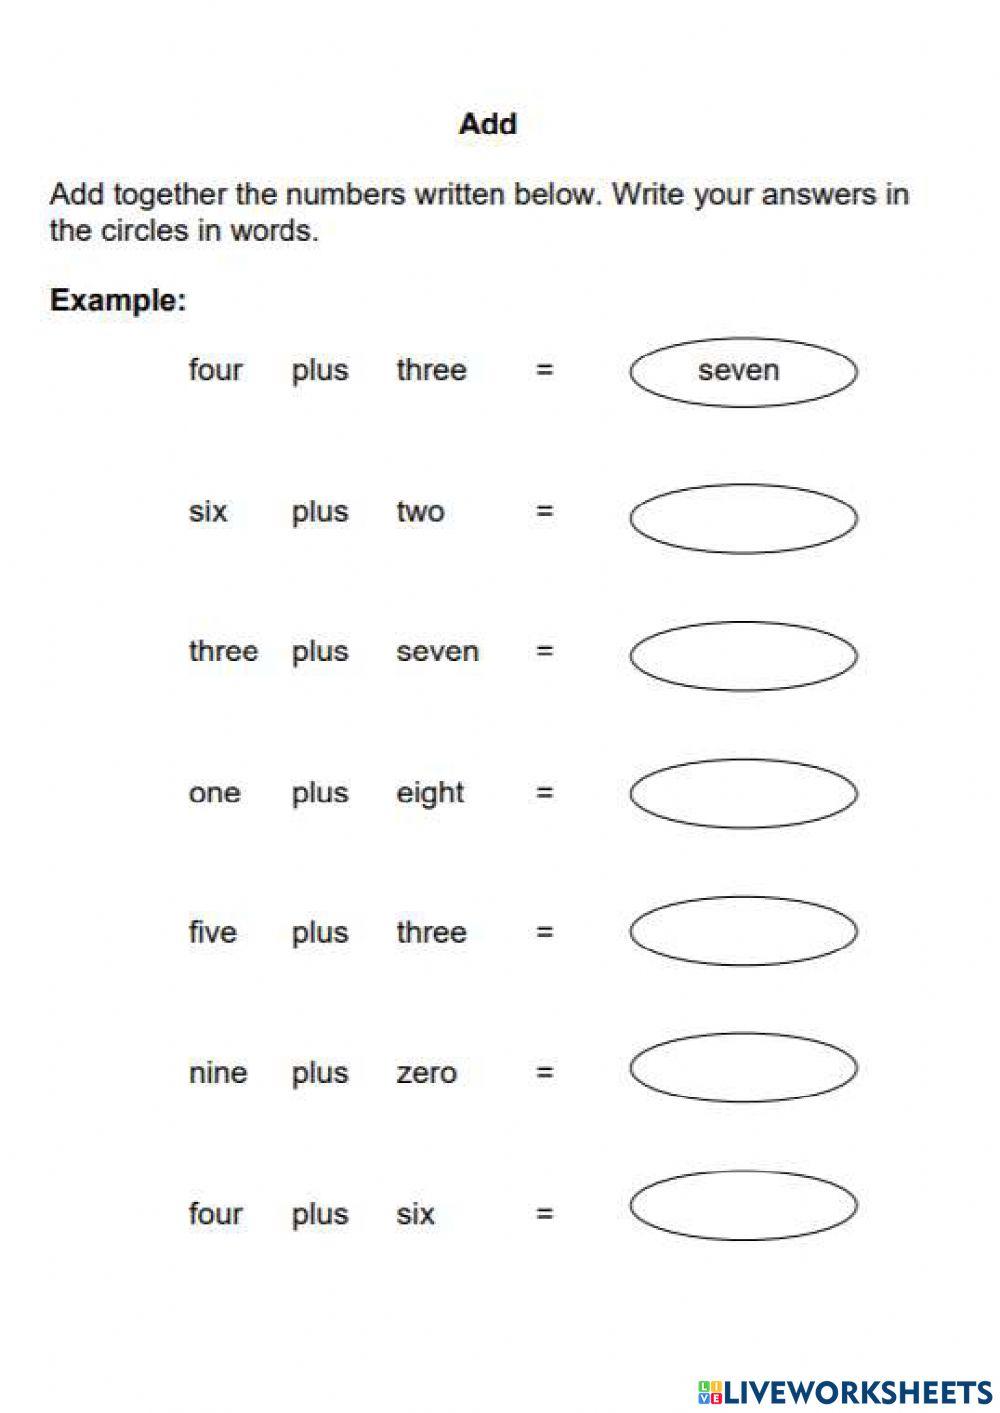 Reading and writing number bonds 0-10